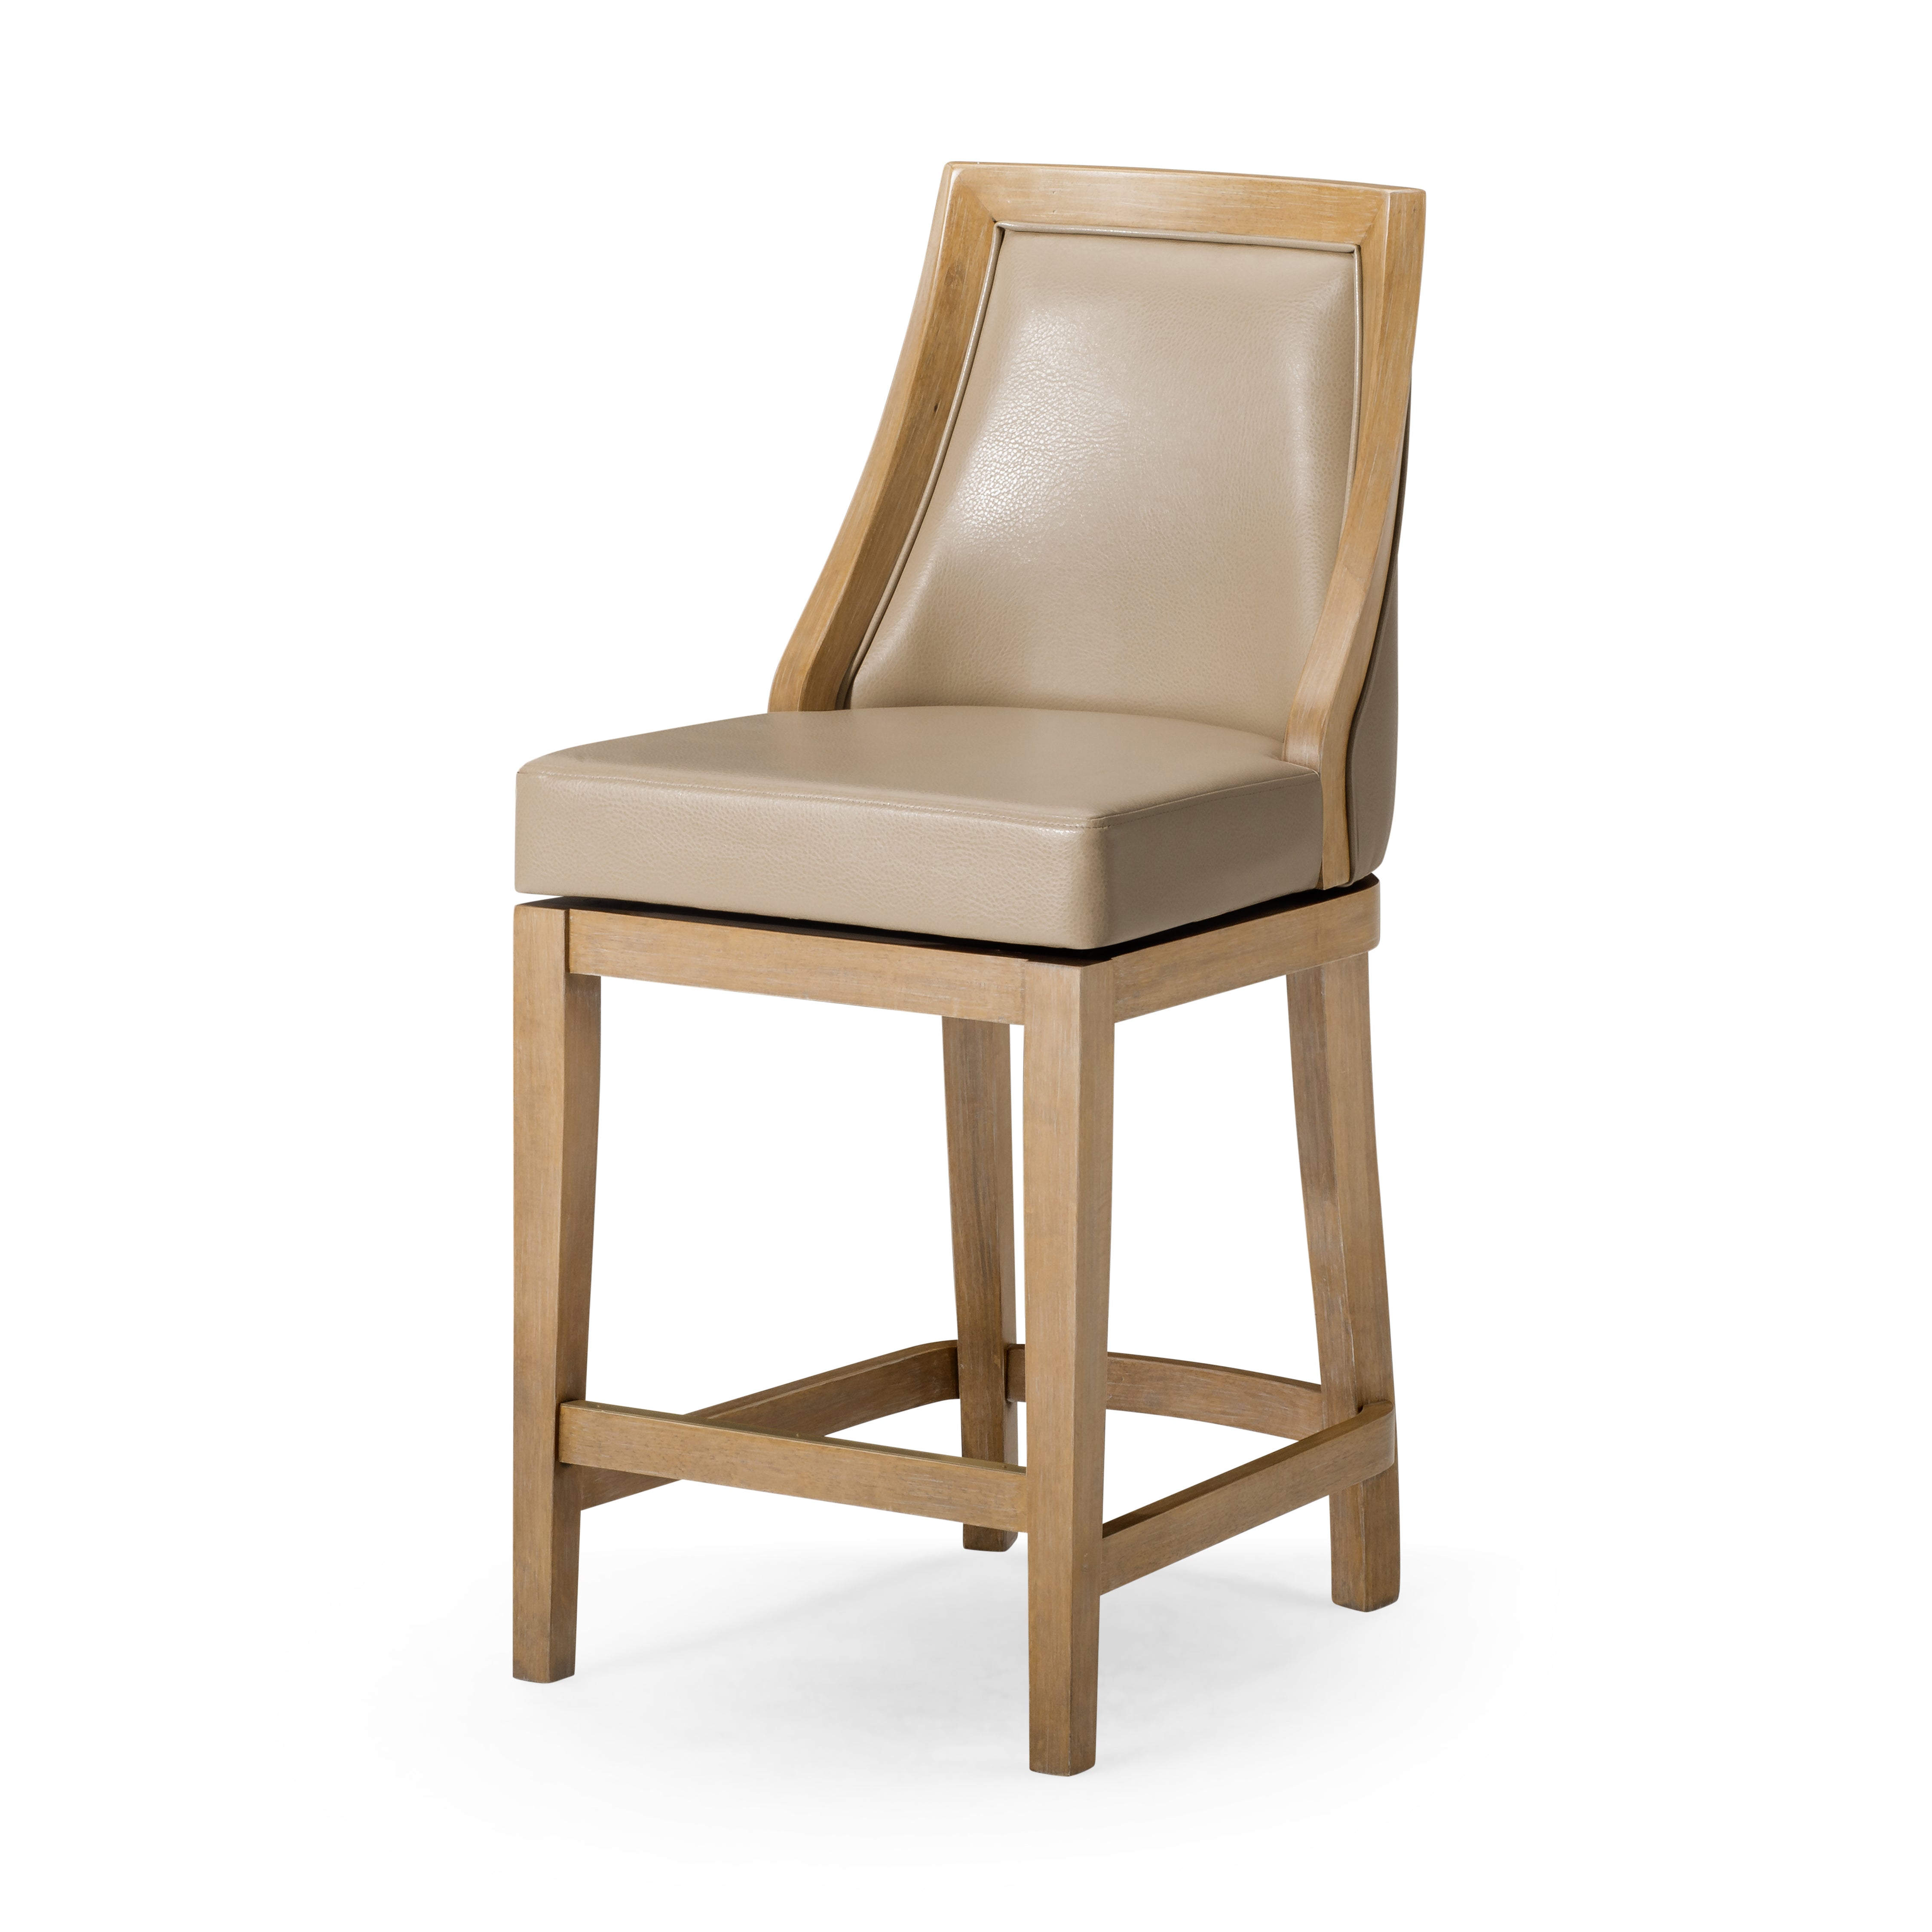 Vienna Counter Stool in Weathered Oak Finish with Avanti Bone Vegan Leather in Stools by Maven Lane